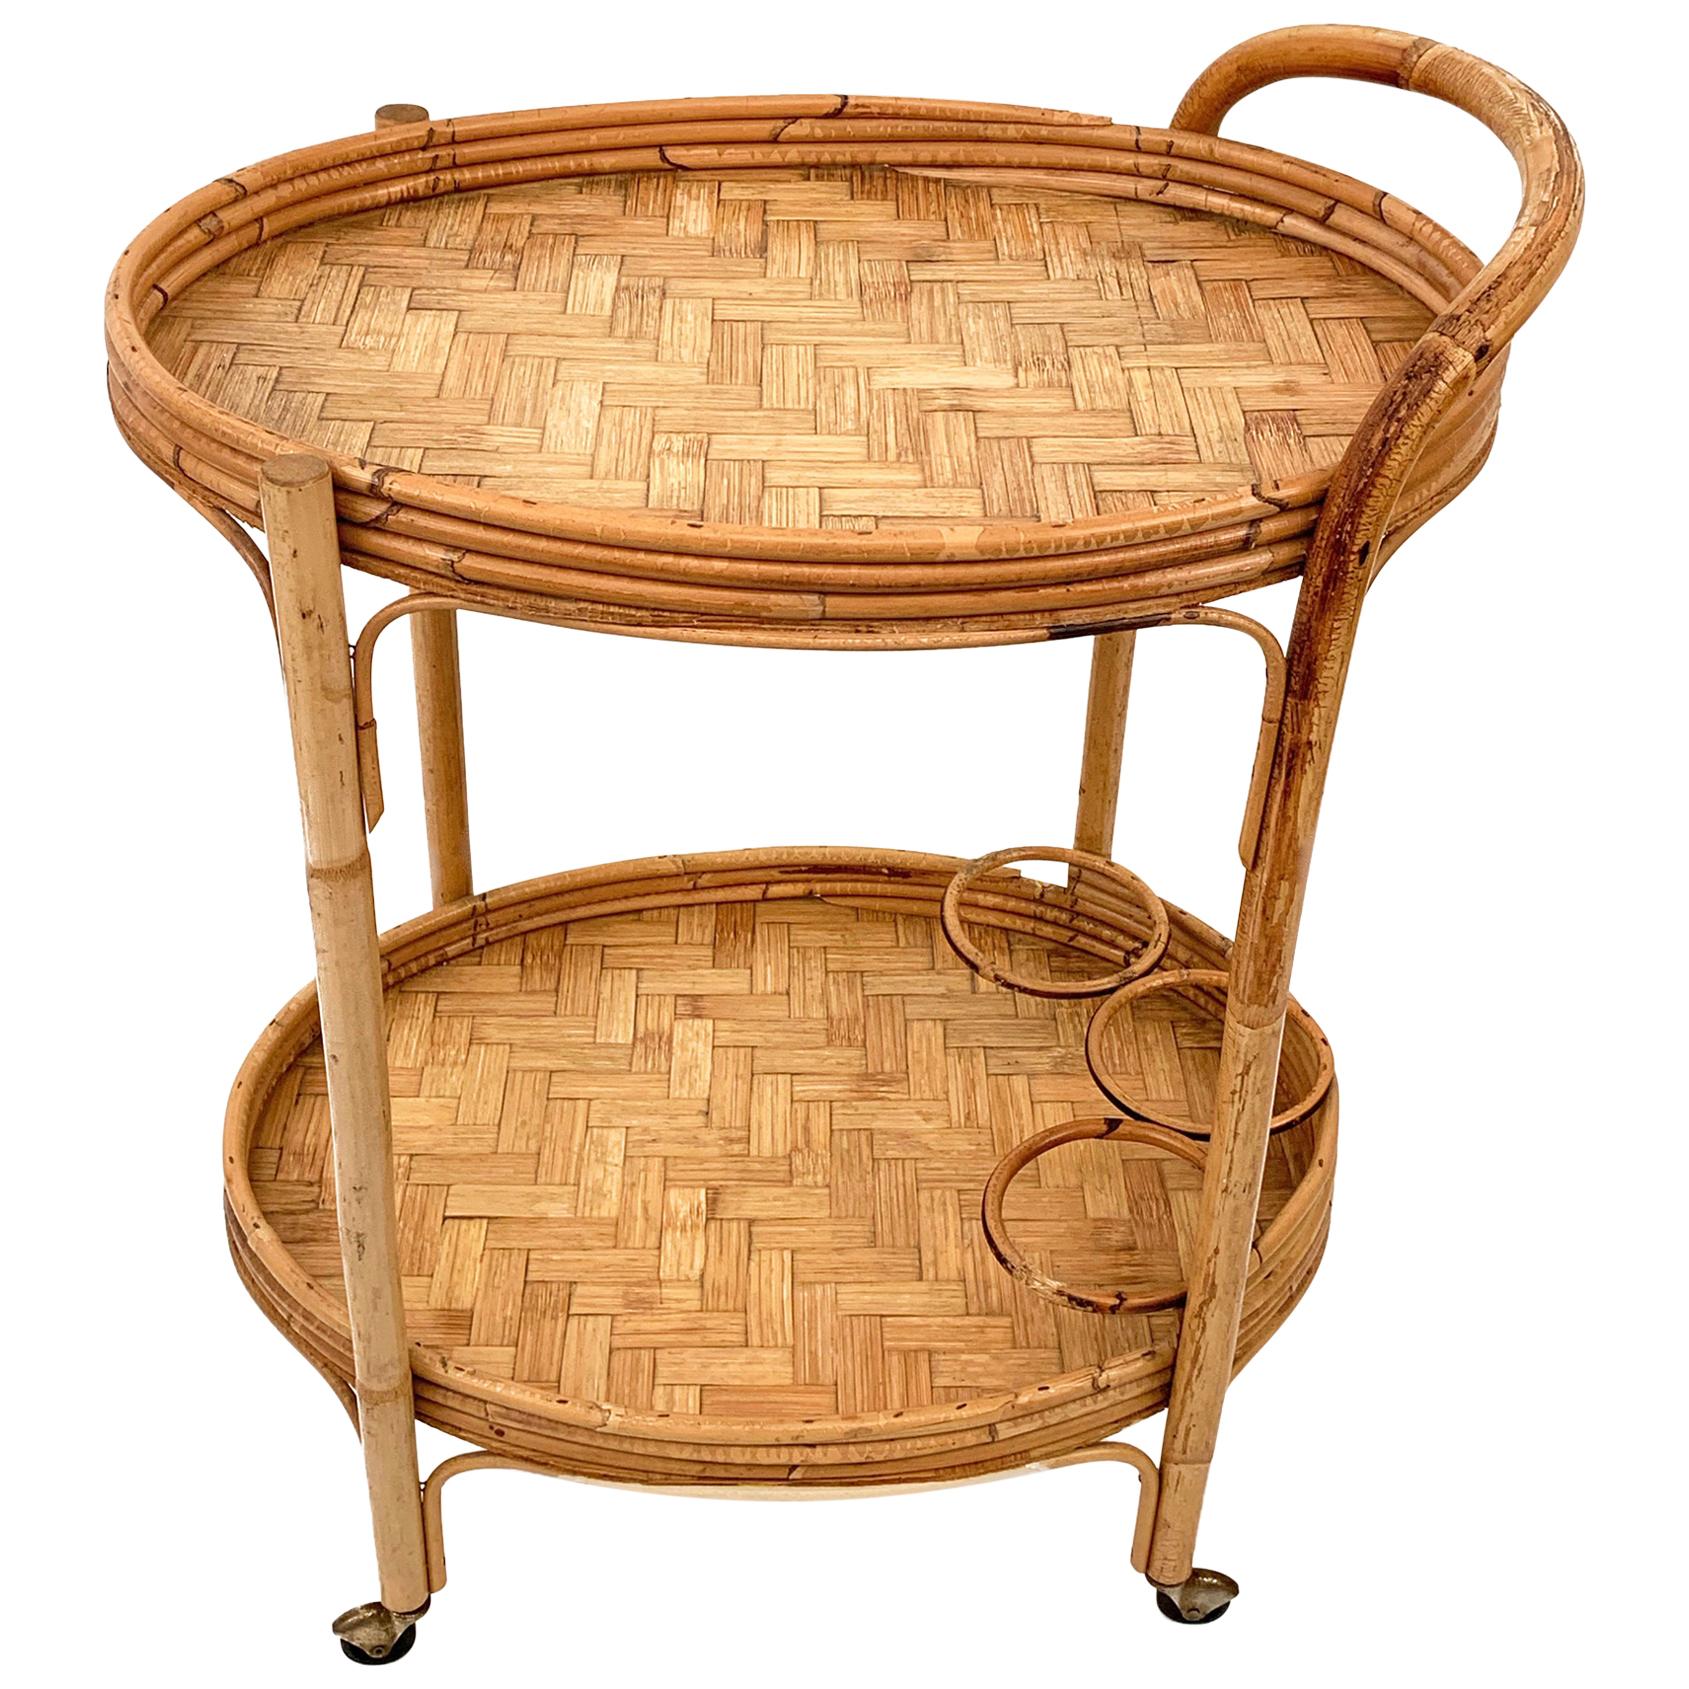 Midcentury Italian Bamboo and Rattan Oval Serving Side Bar Cart, 1960s